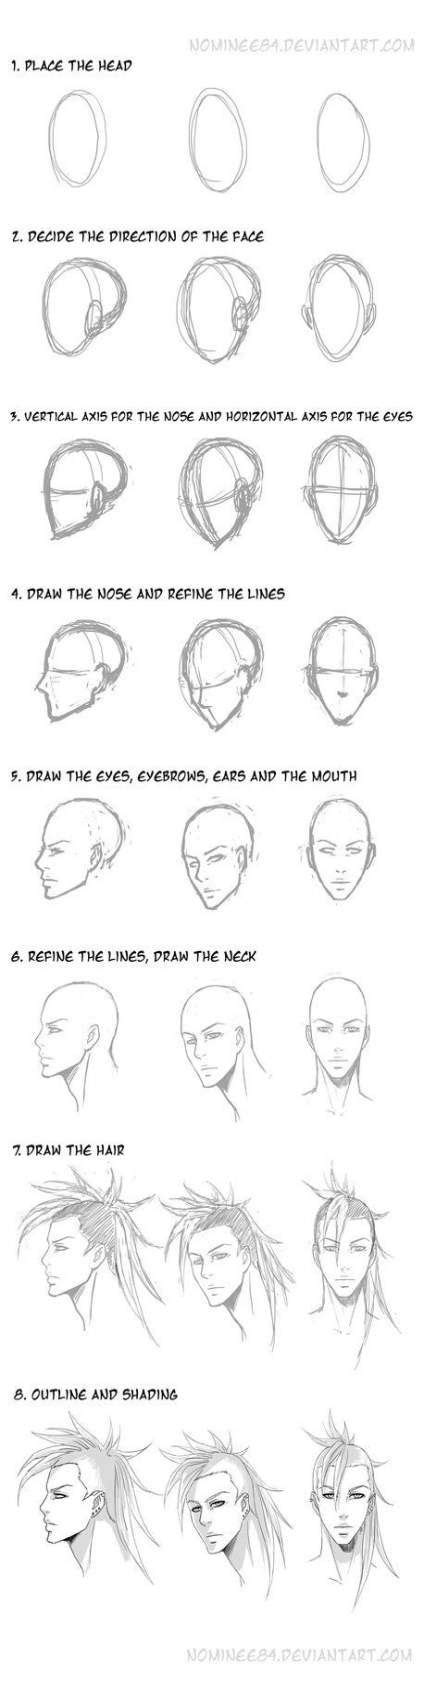 How To Draw Head From Below 58 Ideas Drawings Drawing People Sketches